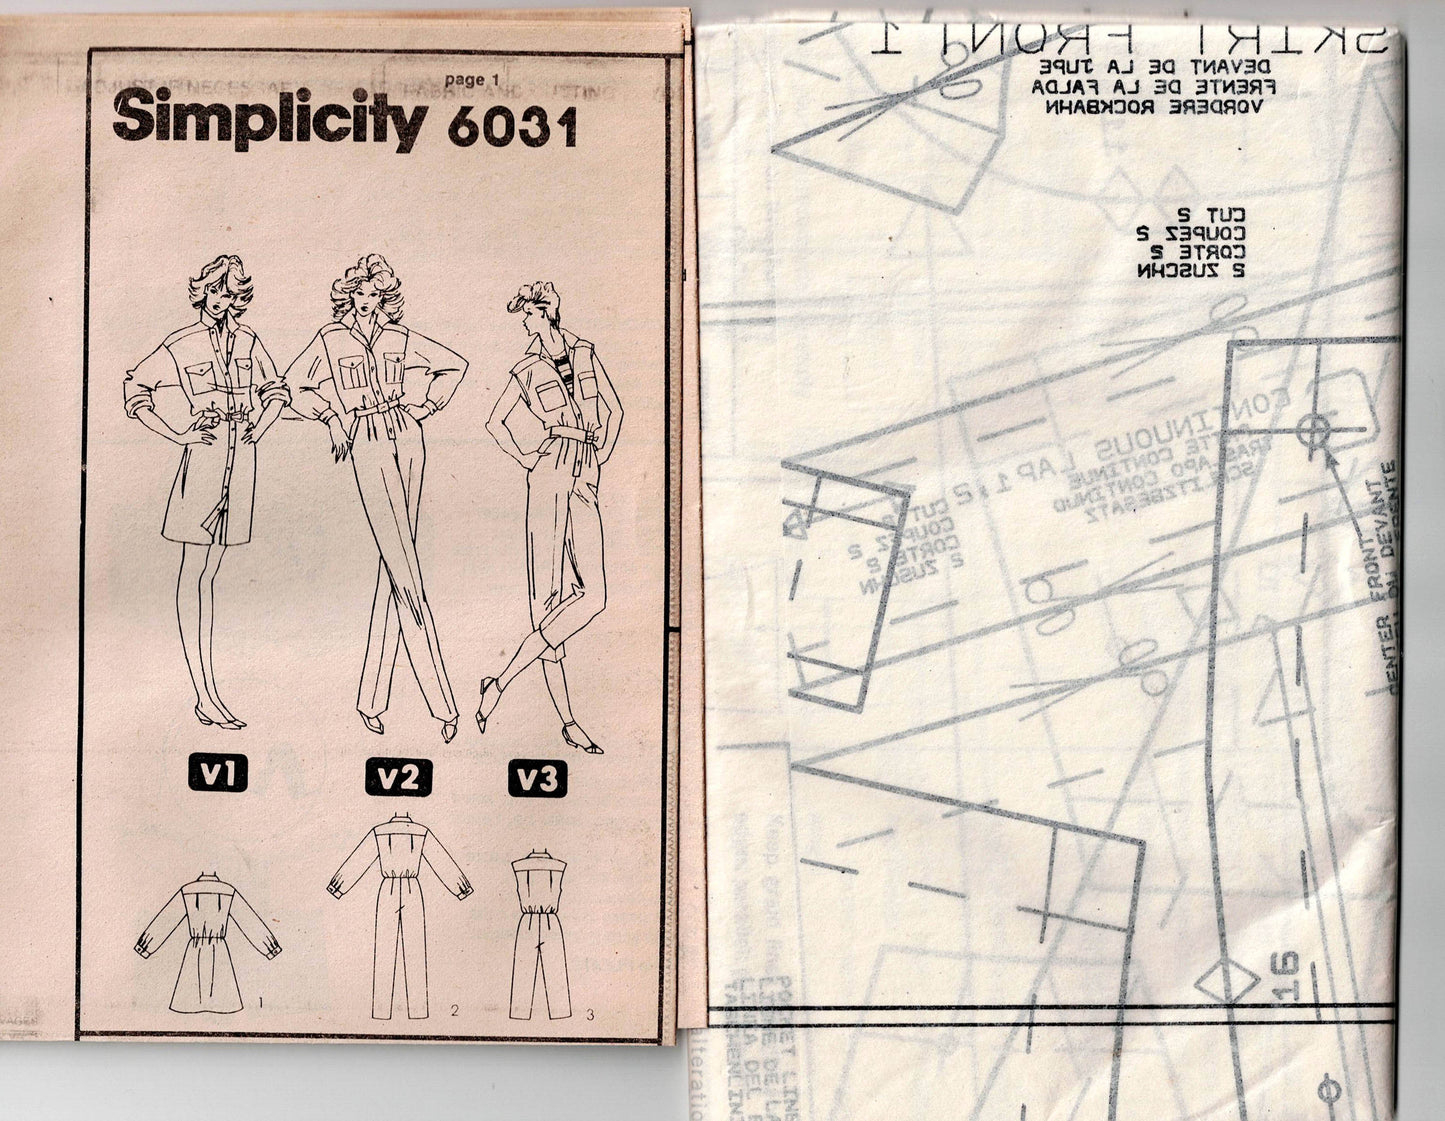 Simplicity 6031 Womens Safari Style Dress Jumpsuit & Rompers 1980s Vintage Sewing Pattern Size 12 Bust 34 inches UNCUT Factory Folded